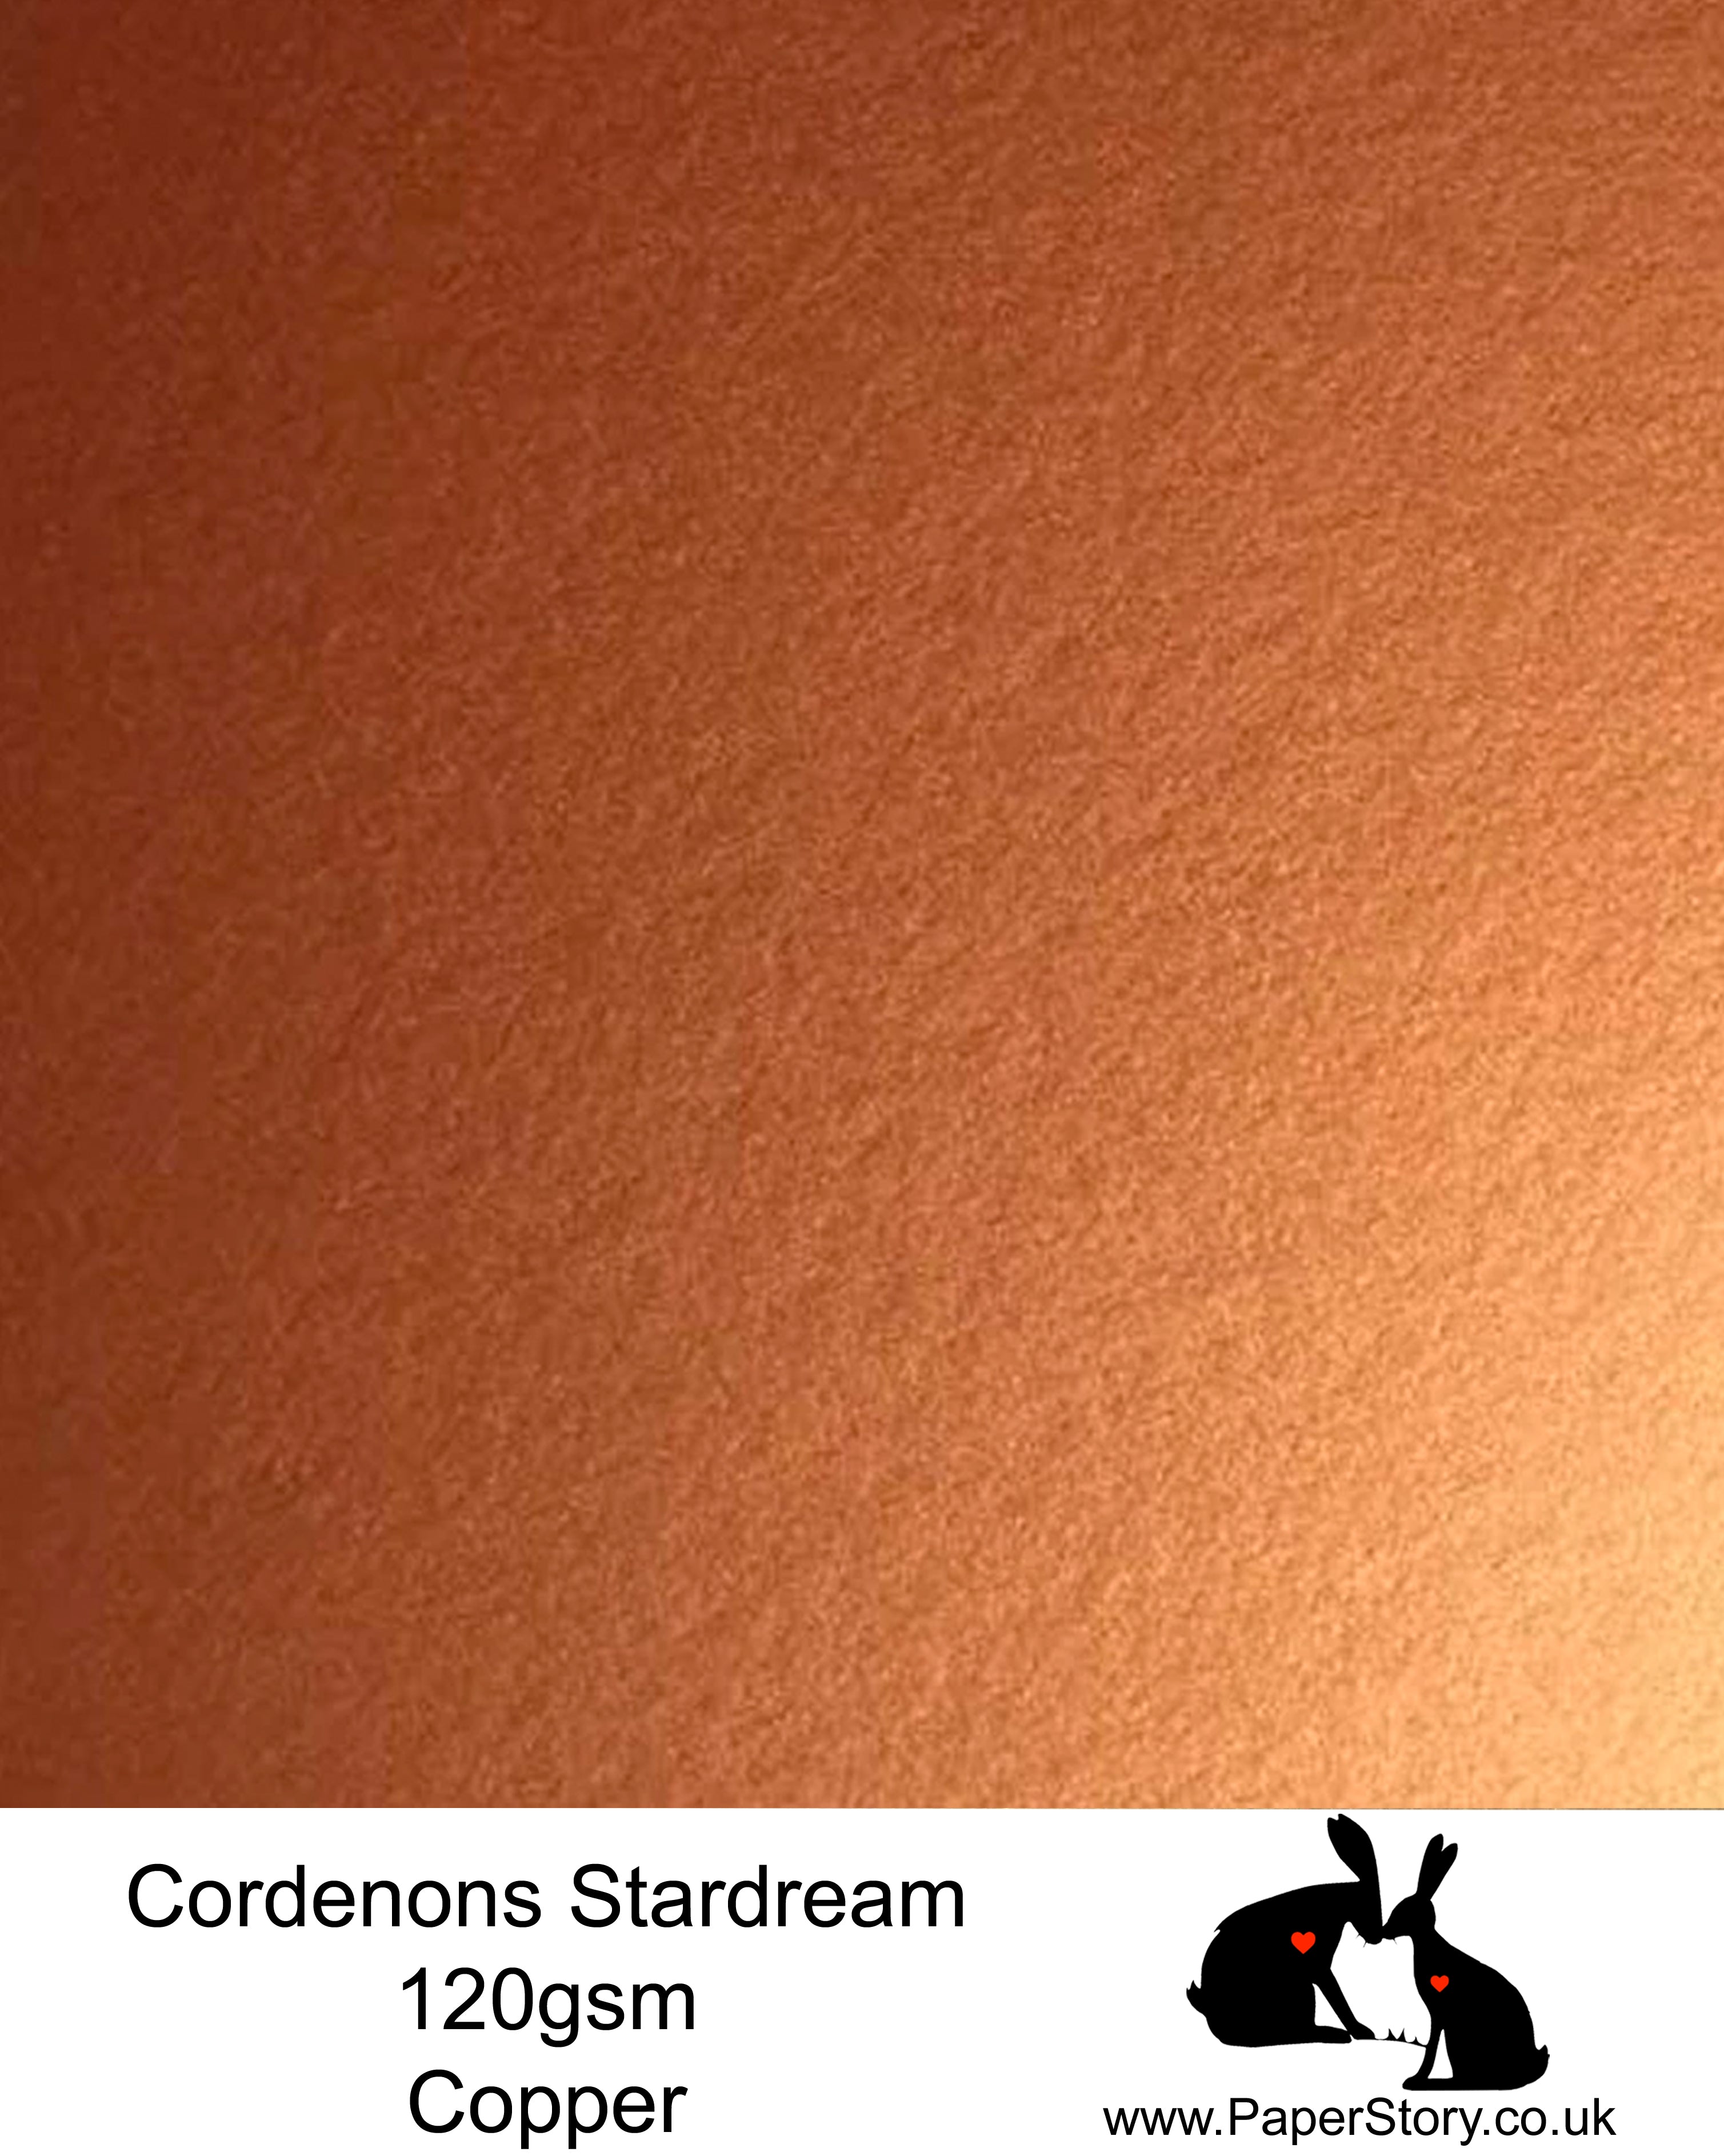 A4 Stardream 120gsm paper for Papercutting, craft, flower making  and wedding stationery. Copper, red brown shimmering metallic paper. Stardream is a luxury Italian paper from Italy, it is a double sided quality Pearlescent paper with a matching colour core. FSC Certified, acid free, archival and PH Neutral